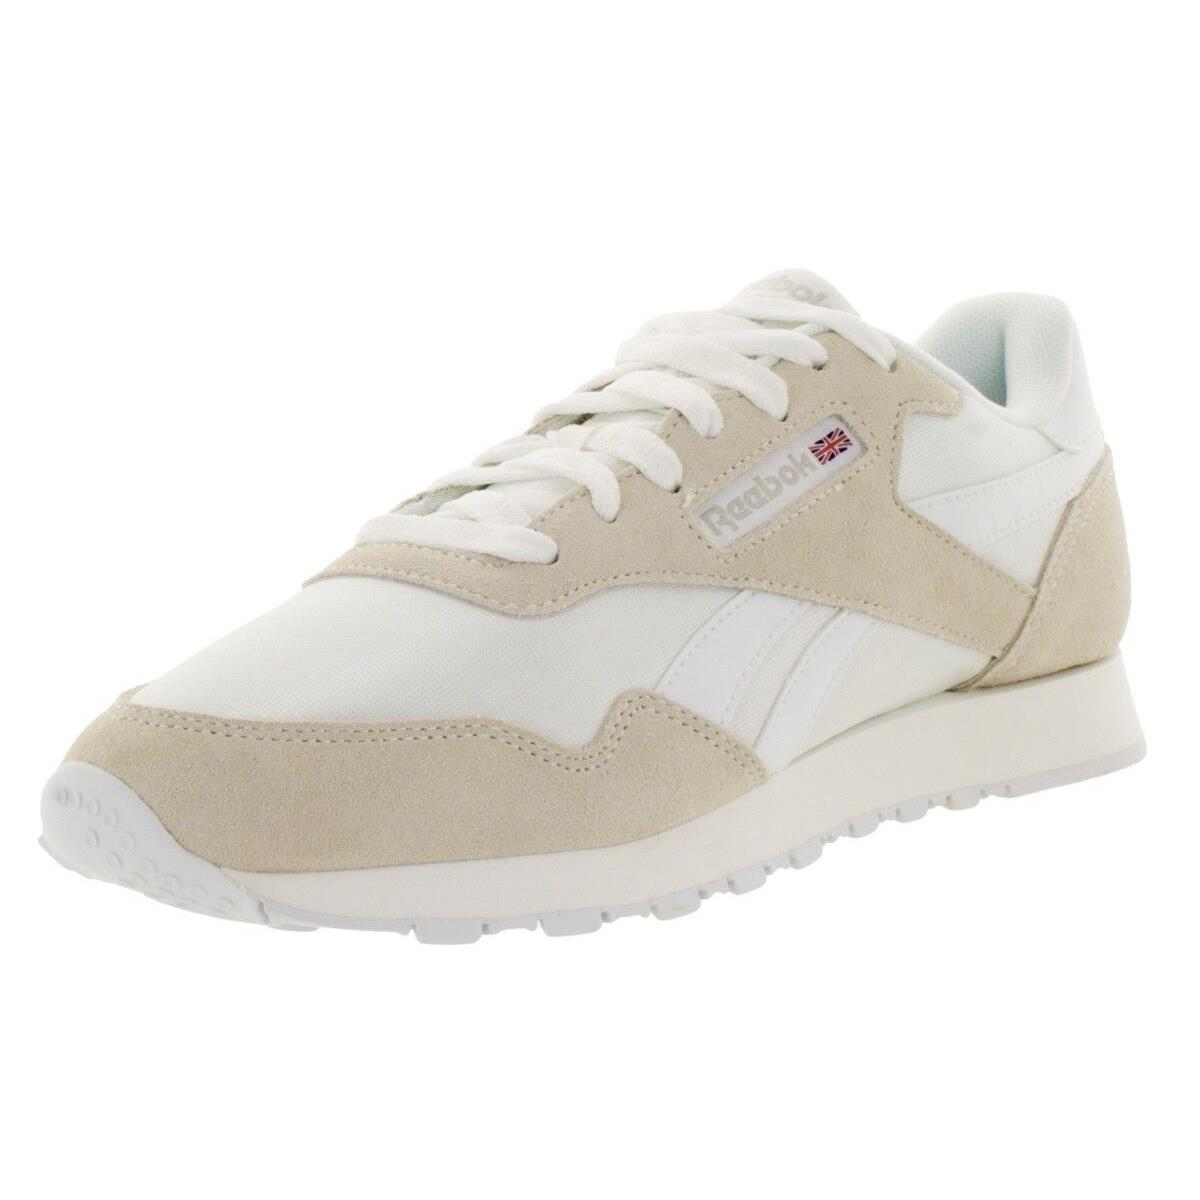 Reebok Men`s Royal Classic Nylon Running Shoes Shoe in White in Sizes 6.5 to 15